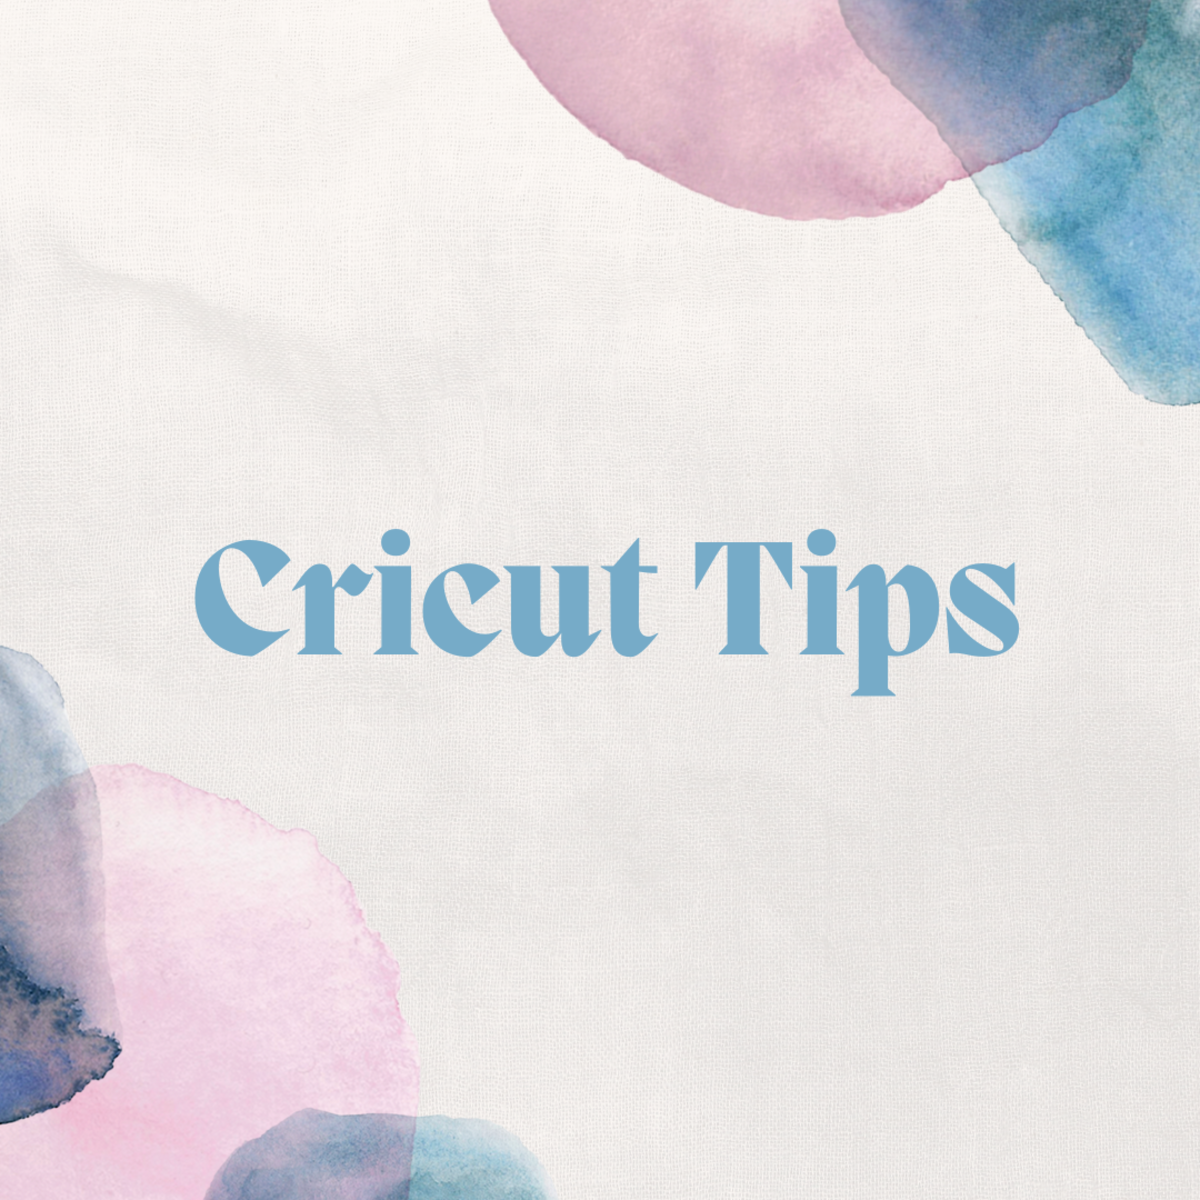 All the Cricut tips that you need to create better projects